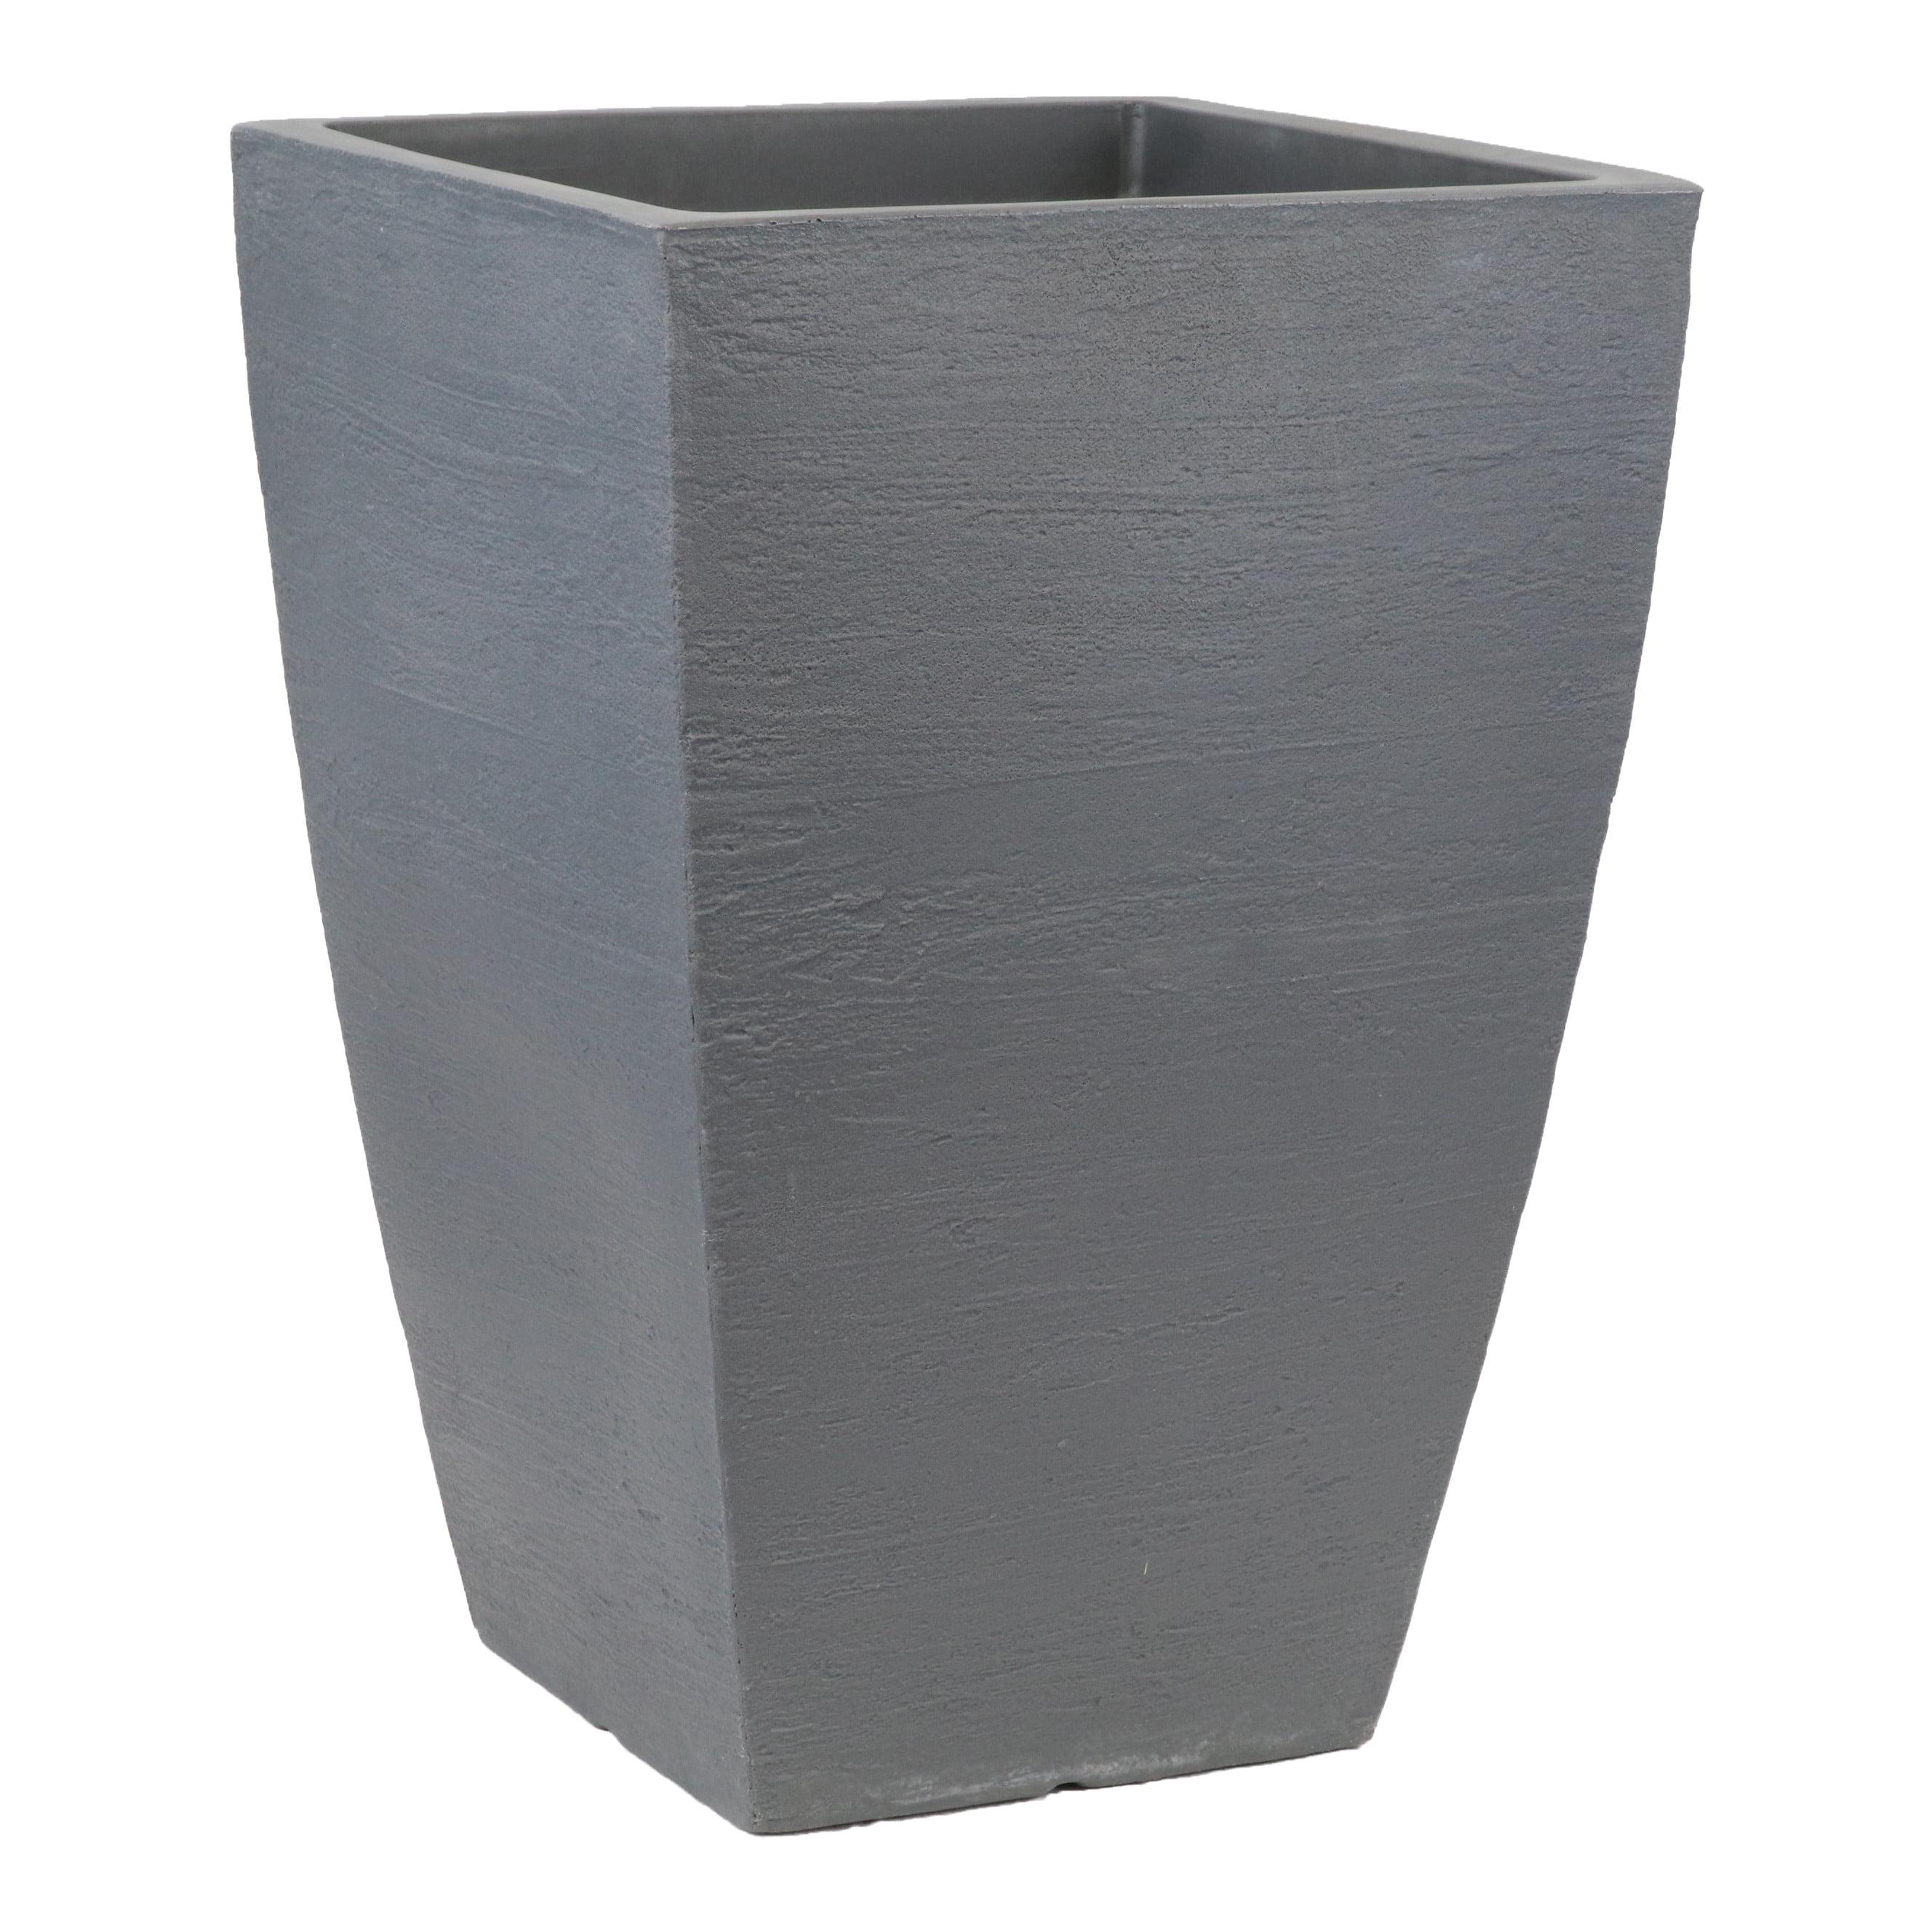 Tusco Modern Tall Square Slate Planter, Weather-Resistant 23"H